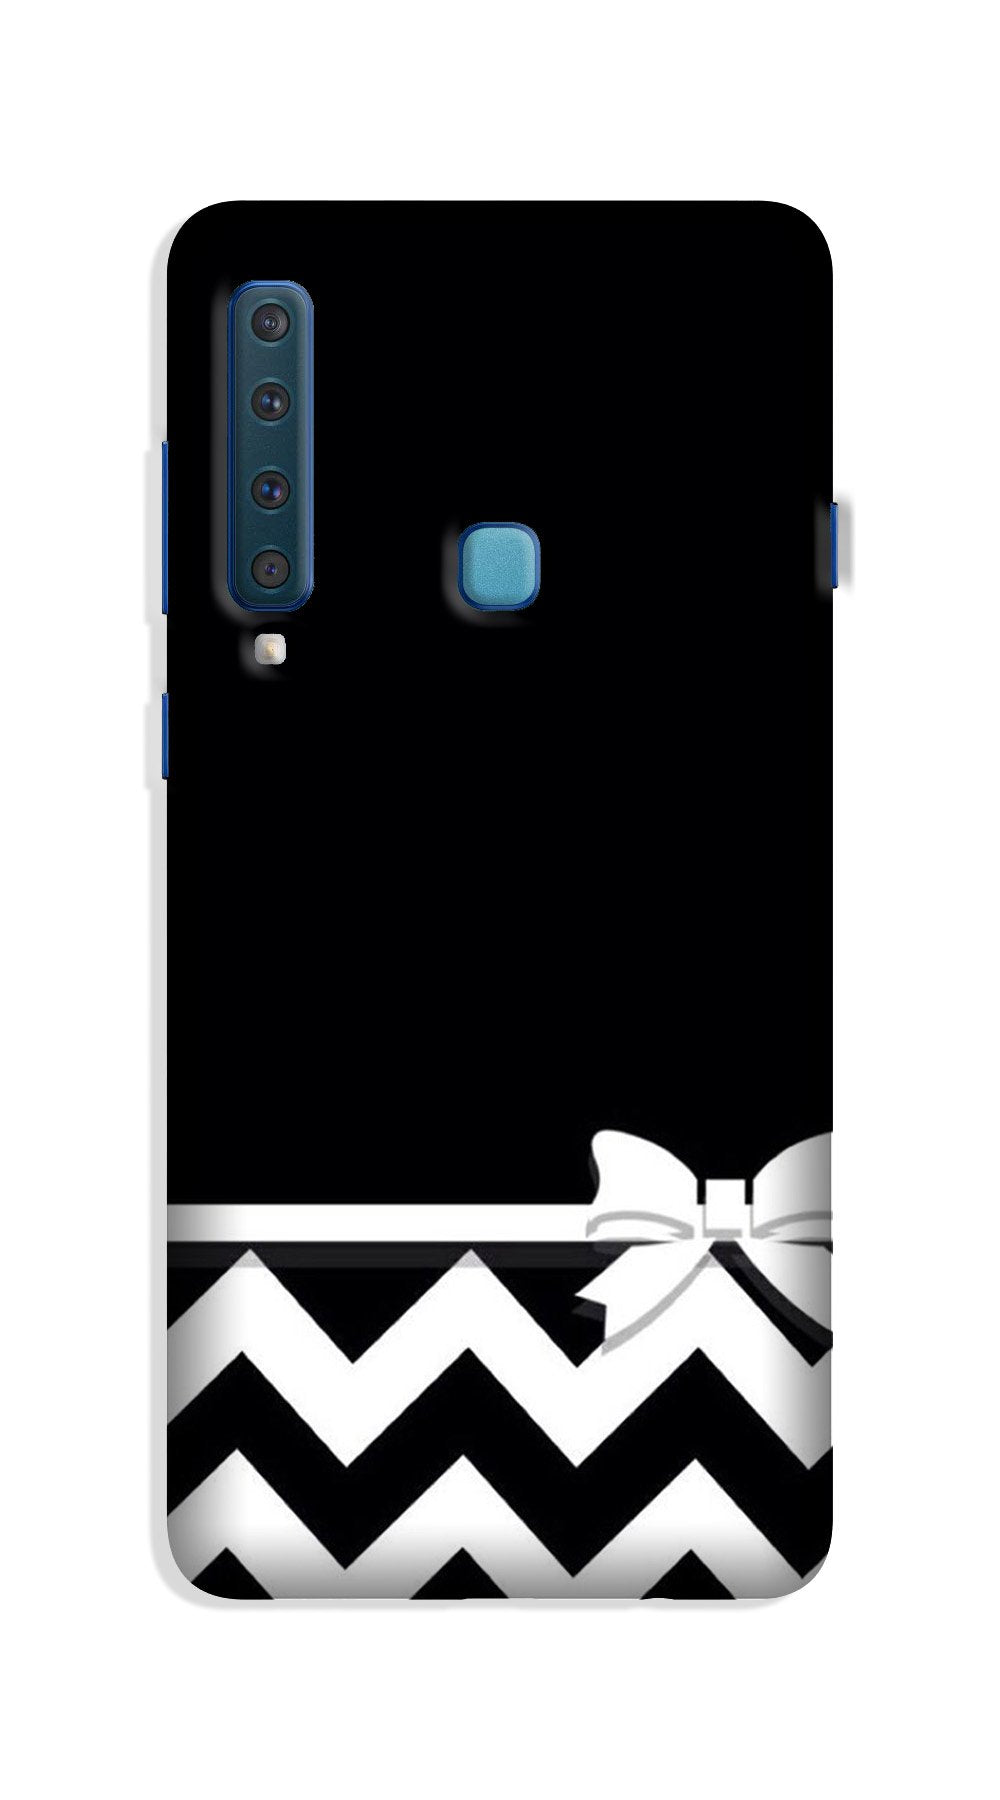 Gift Wrap7 Case for Galaxy A9 (2018)